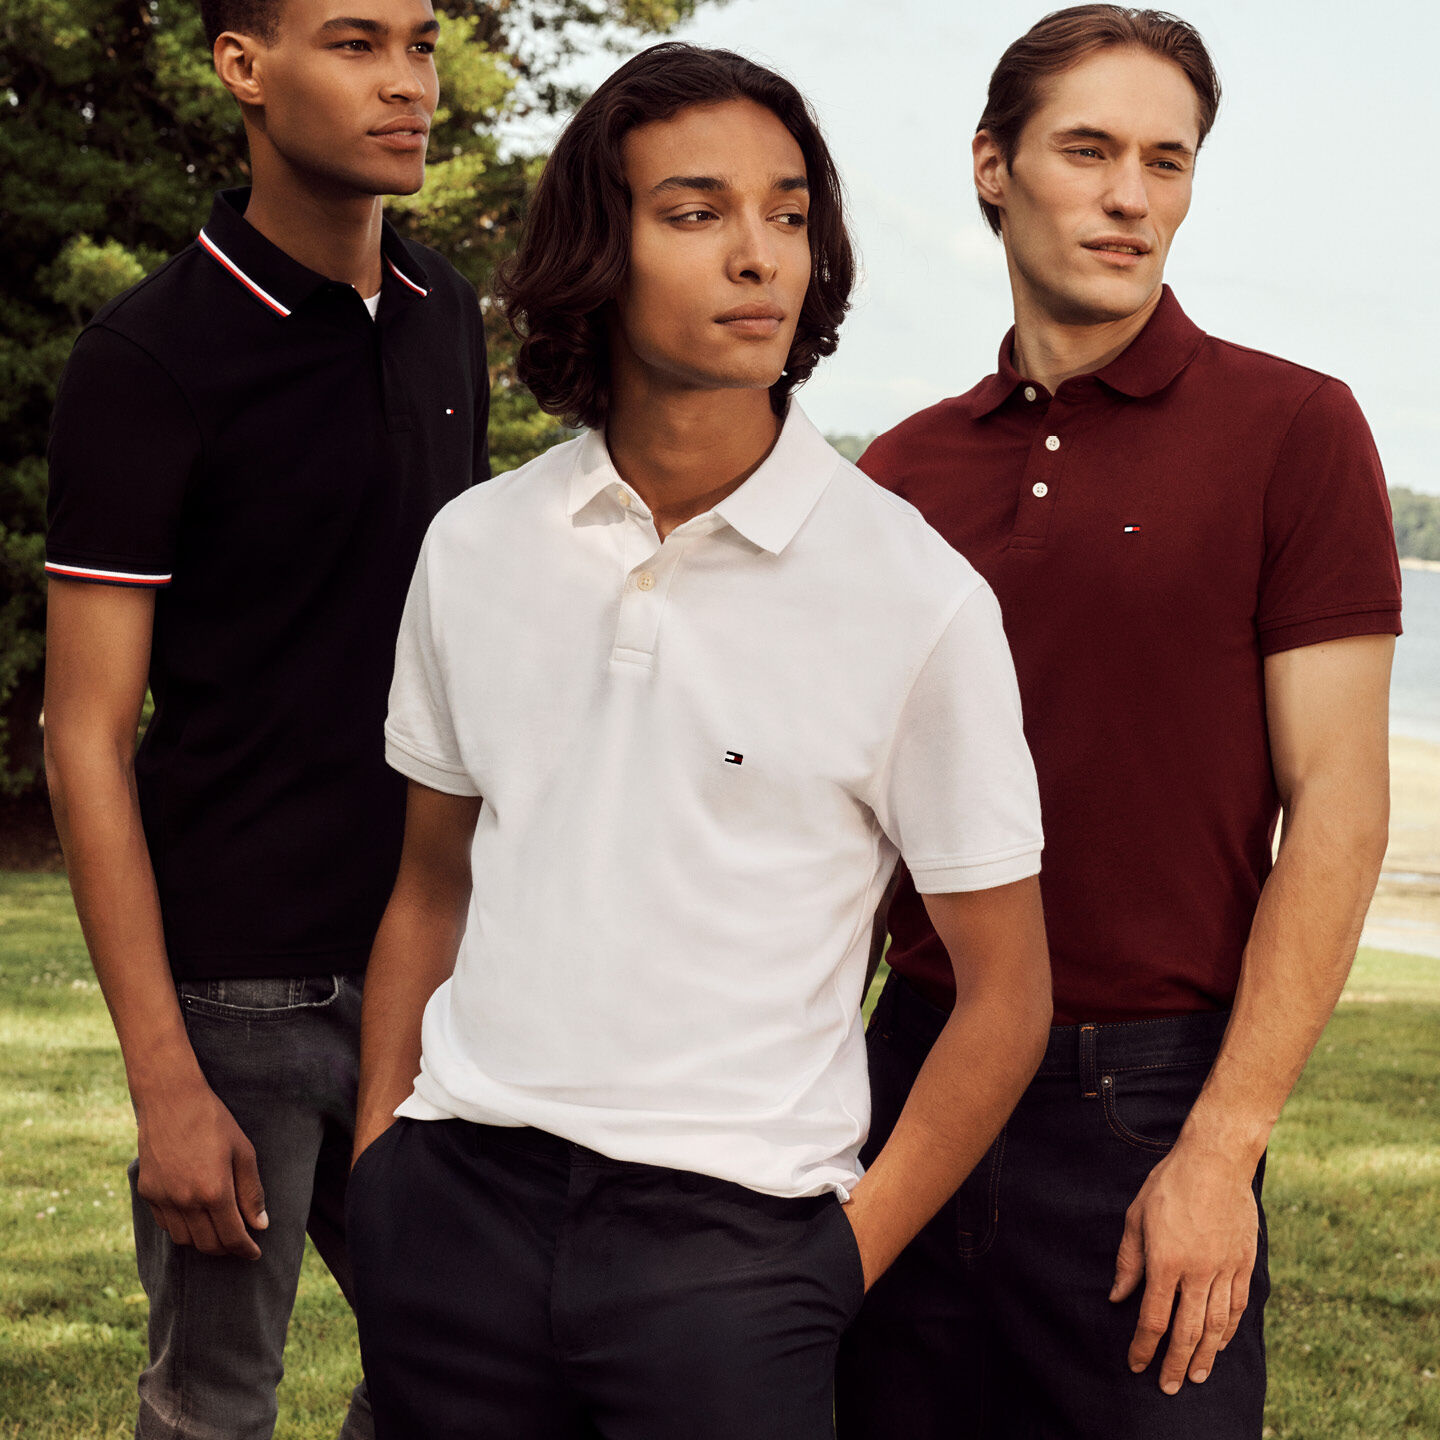 Tommy Hilfiger Polo Shirt Guide